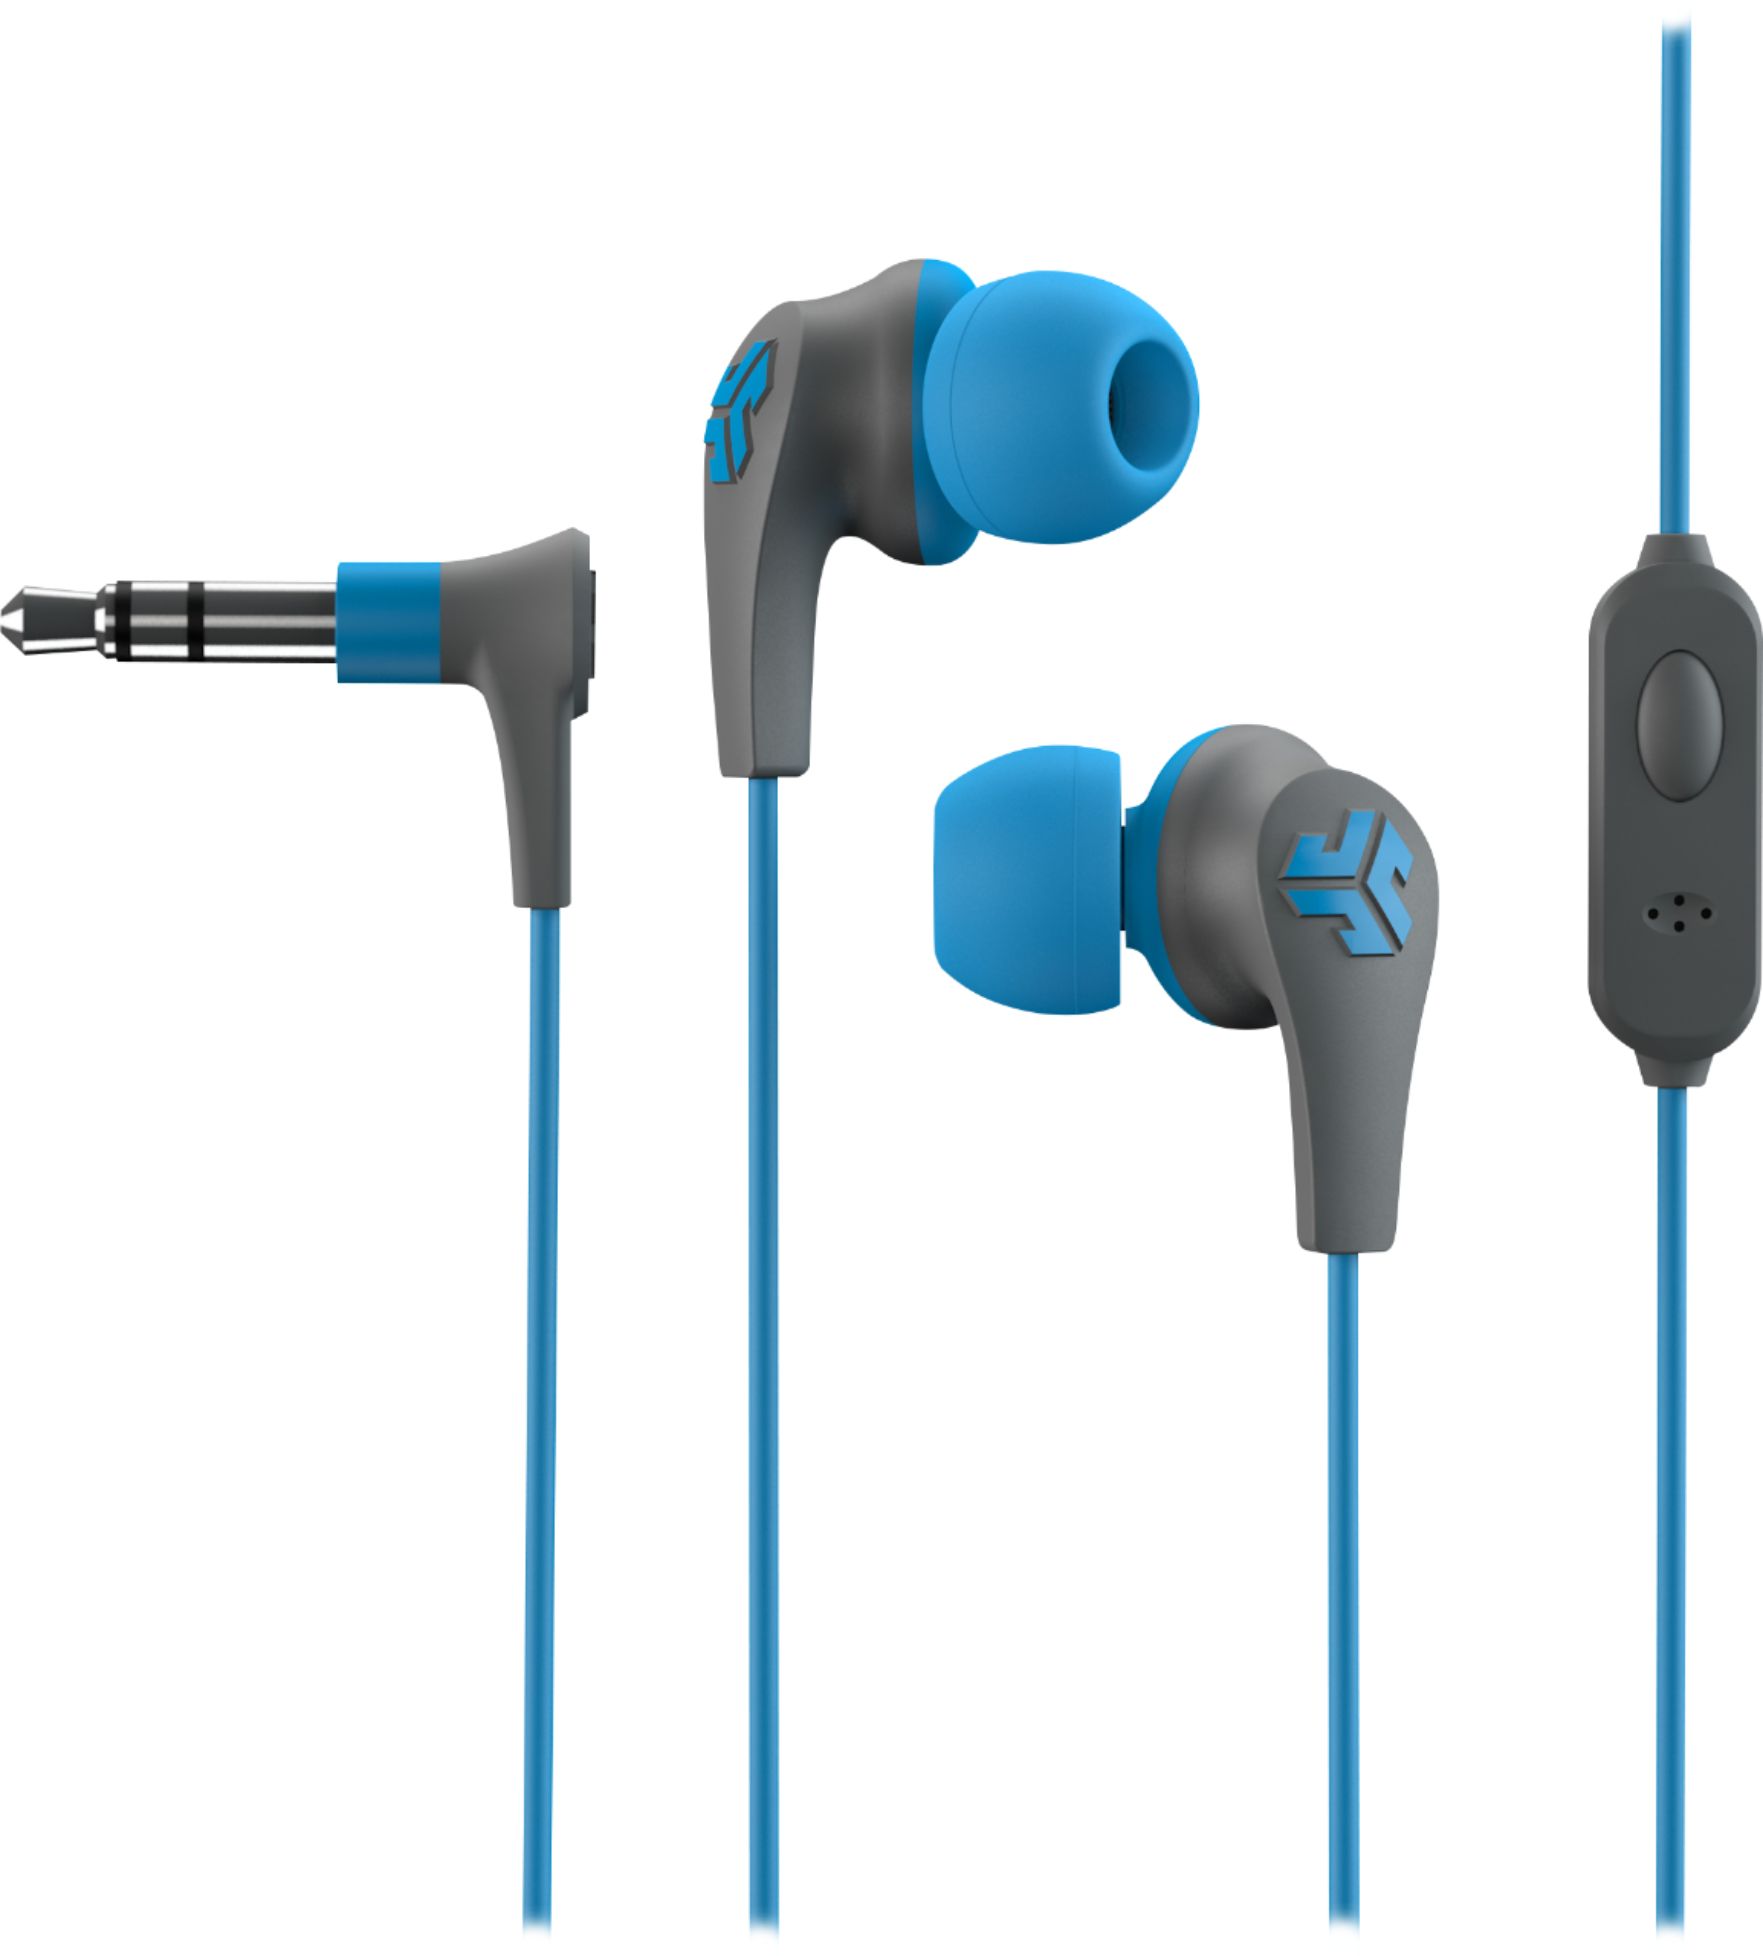 jbuds pro earbuds review